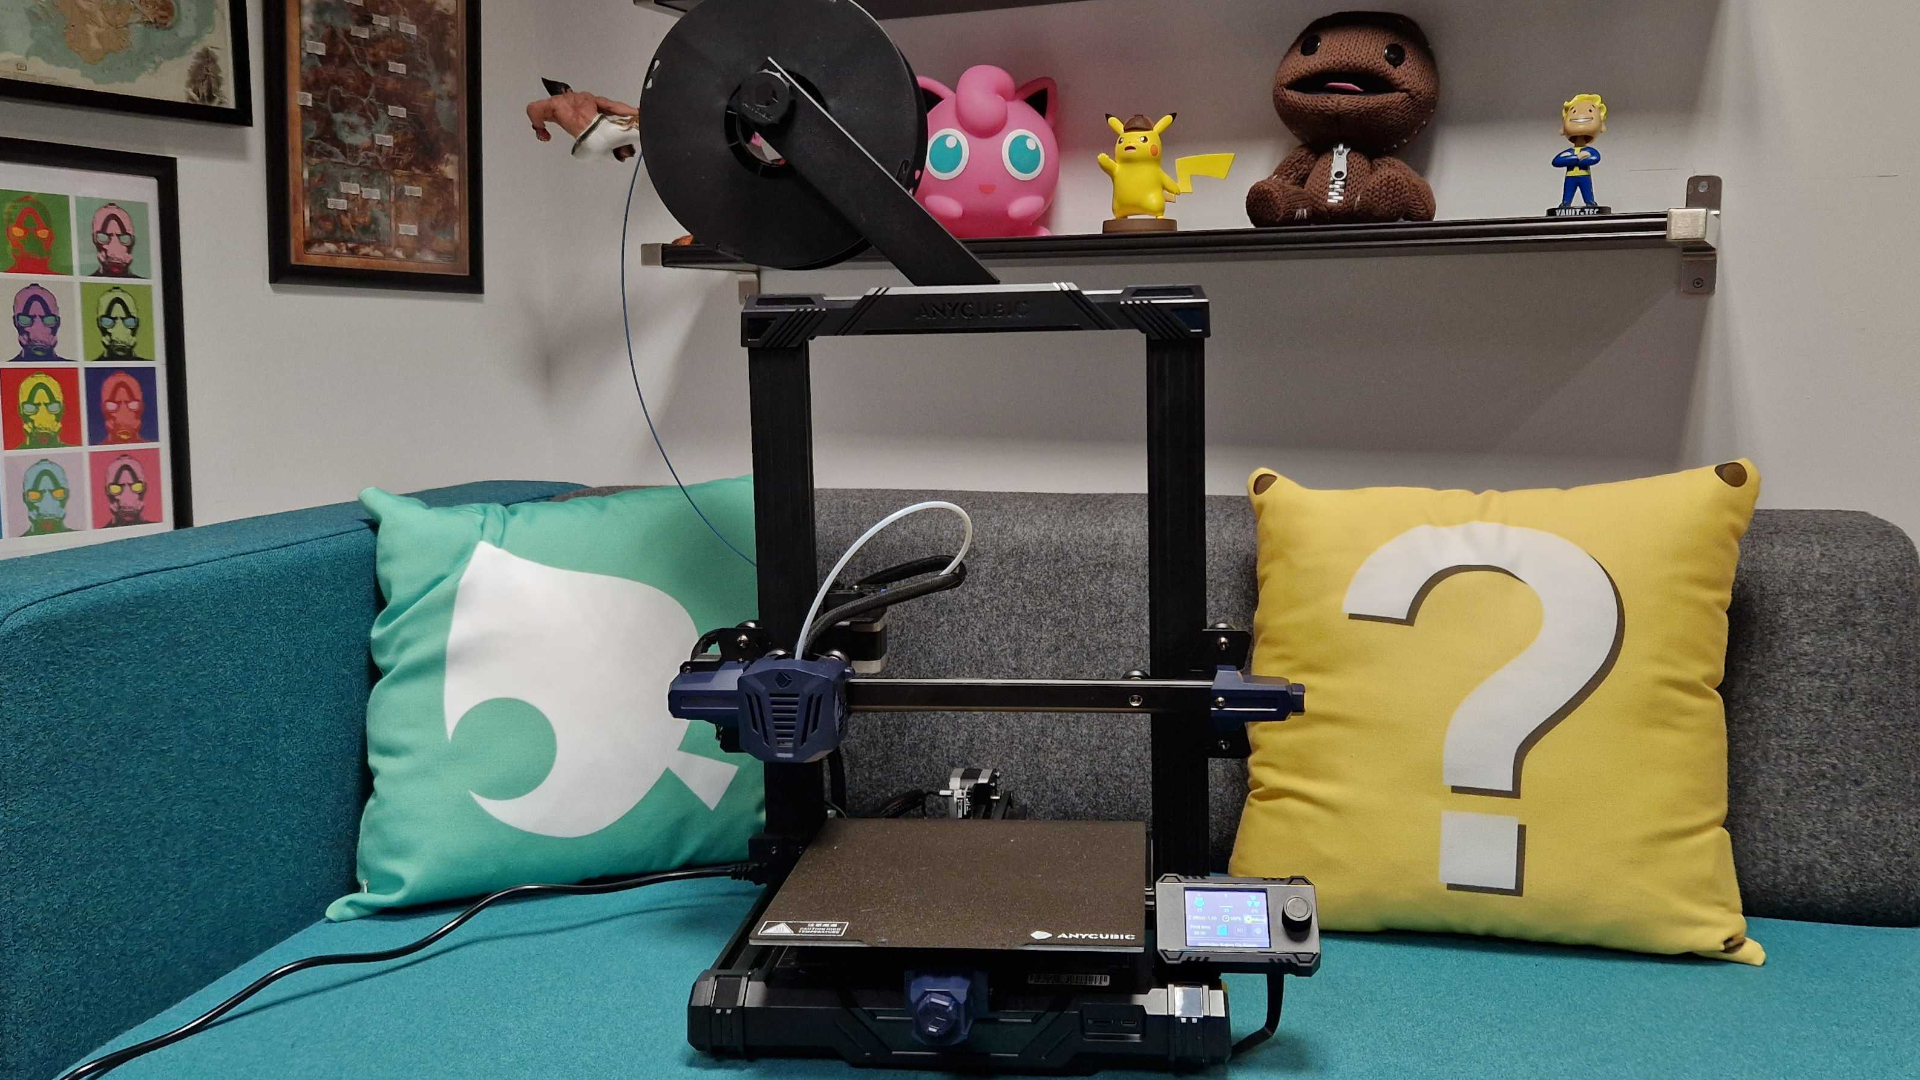 Anycubic Kobra 2 review: Fast & easy printing for beginners